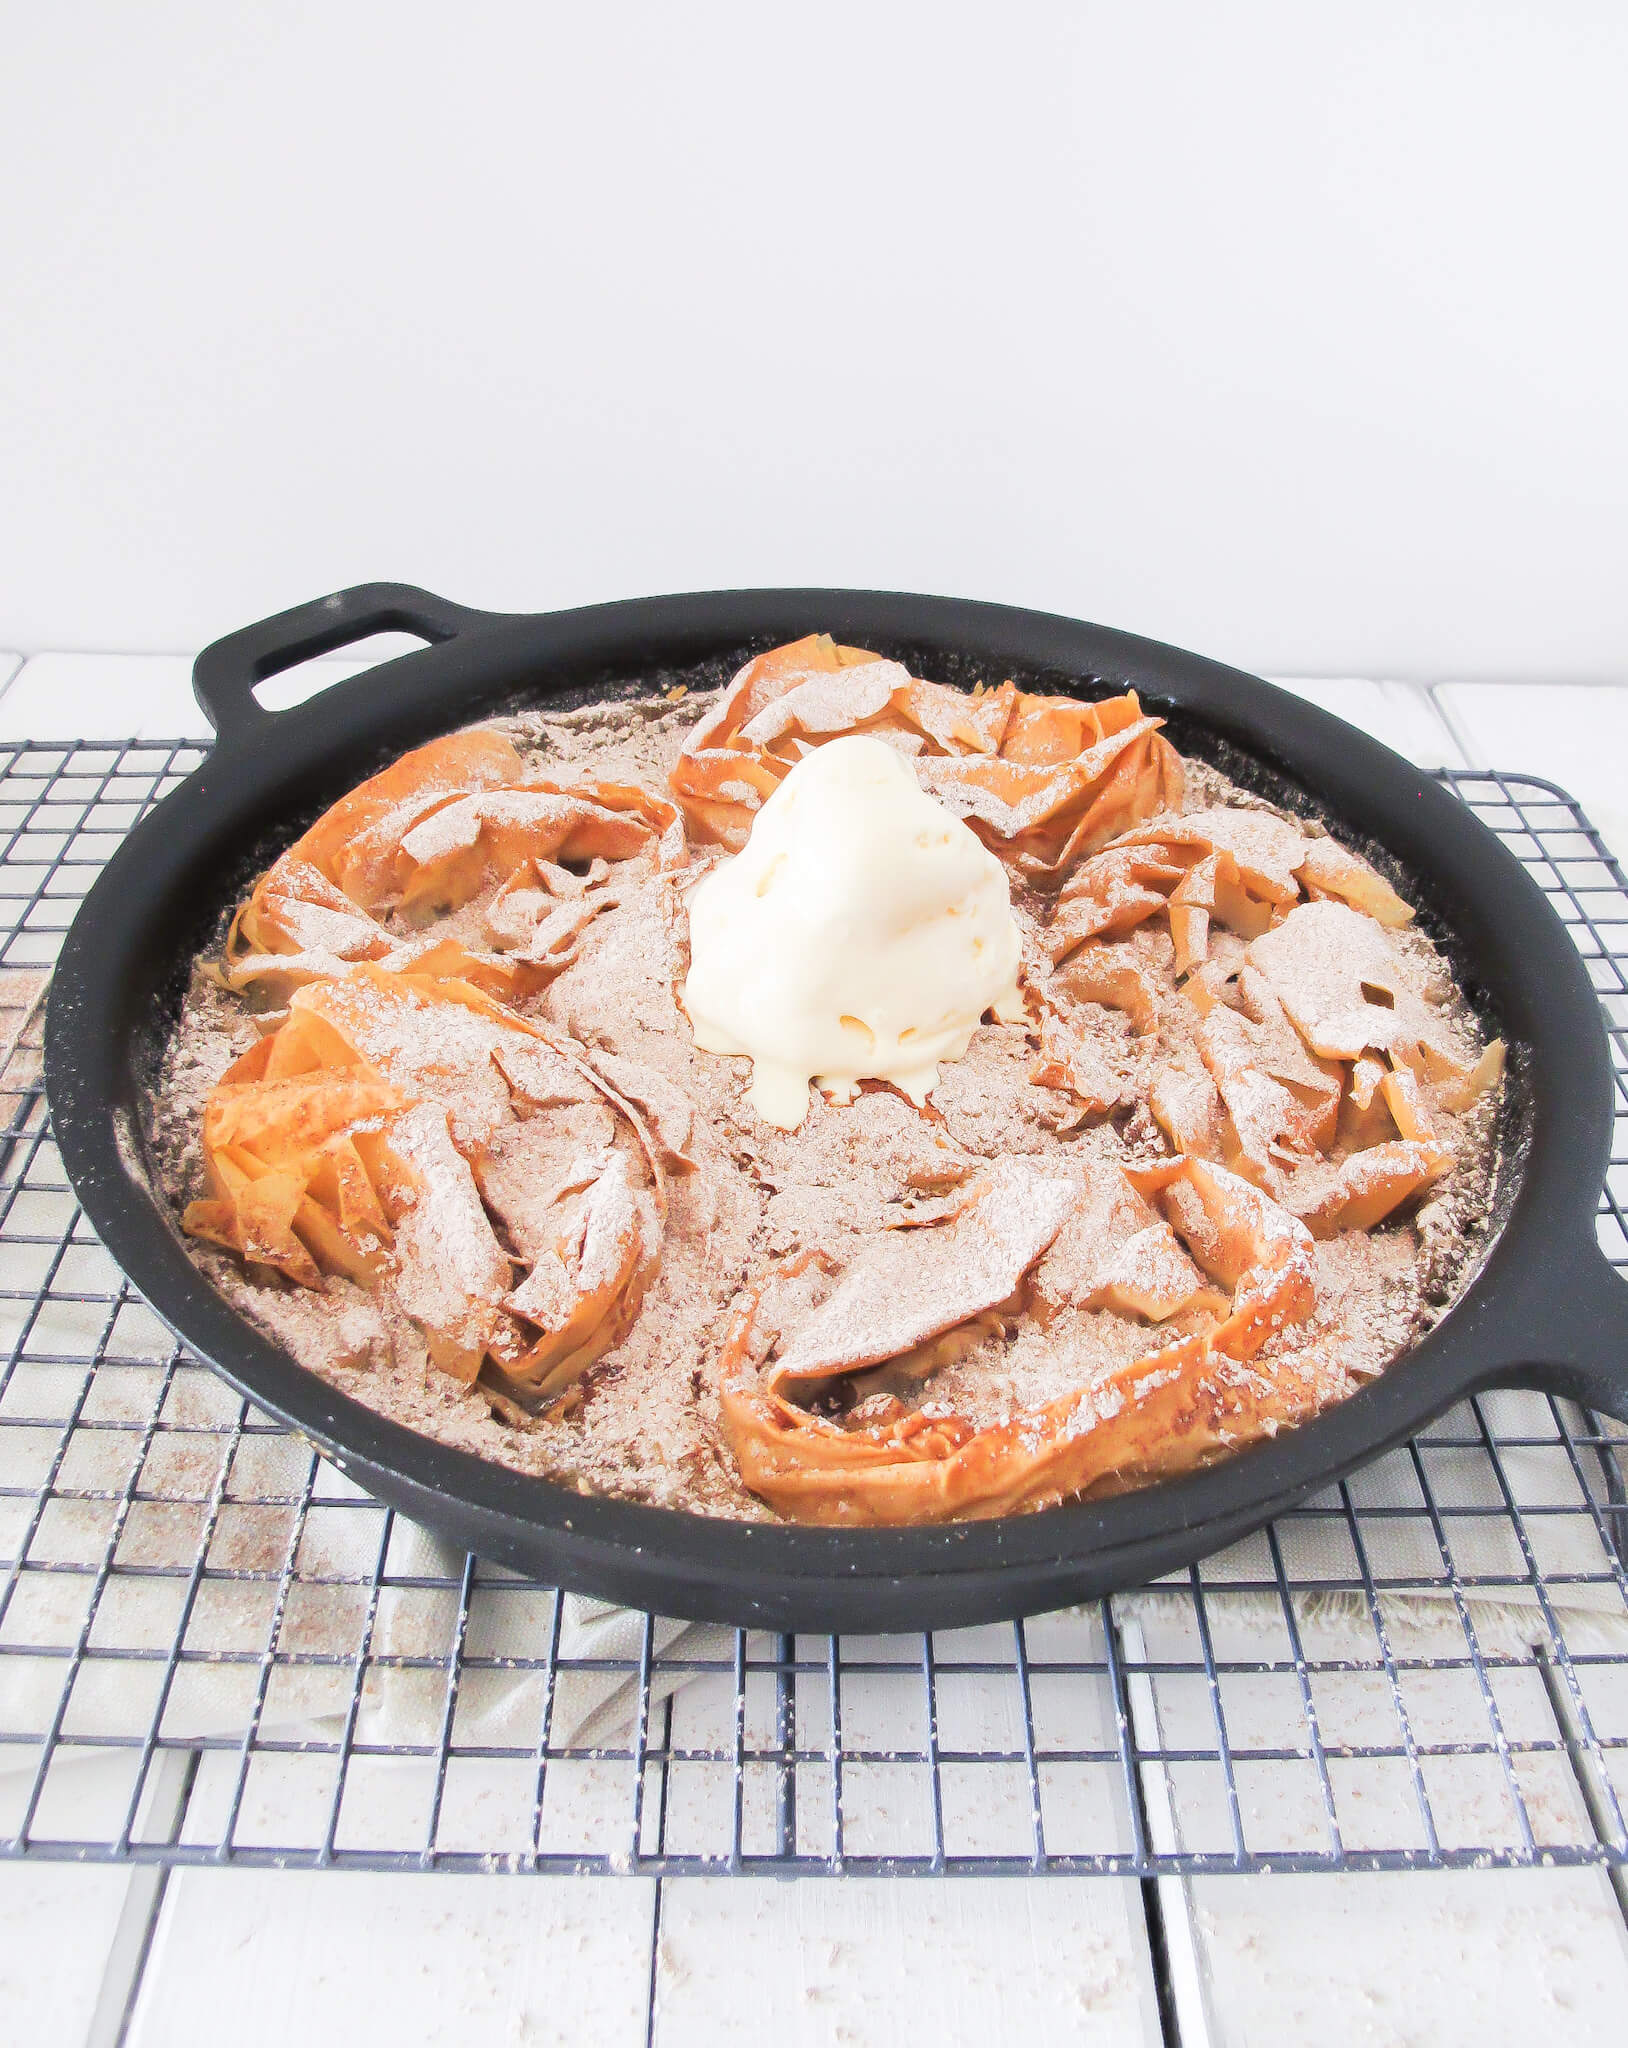 milk pie with curled phyllo sheets baked in a cast iron skillet